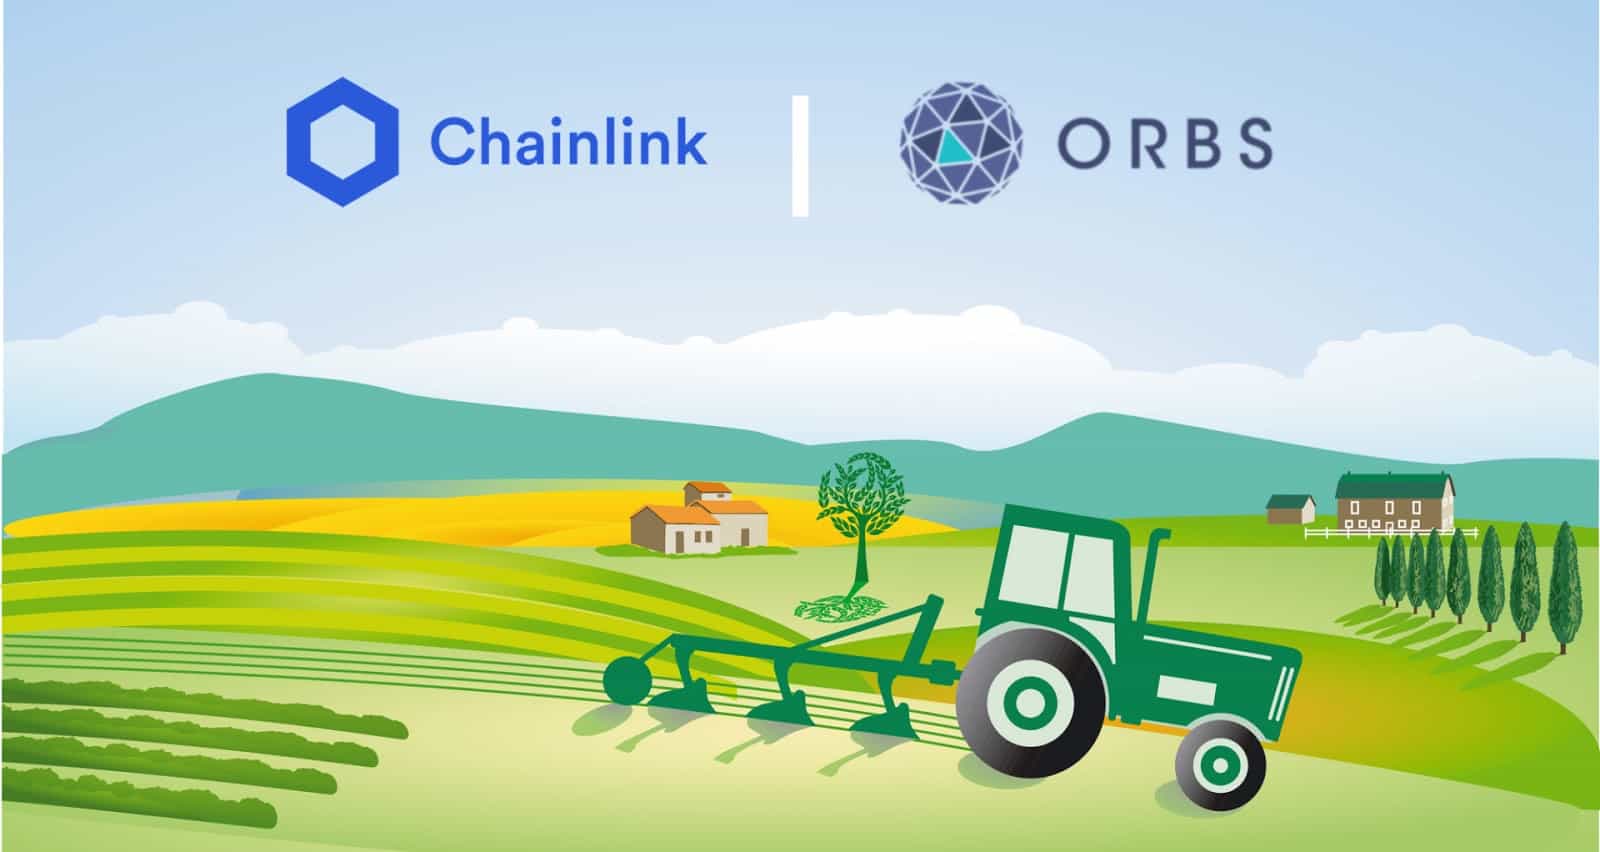 Orbs-integrates-with-chainlink-to-create-flash-loan-proof-farming-protocol